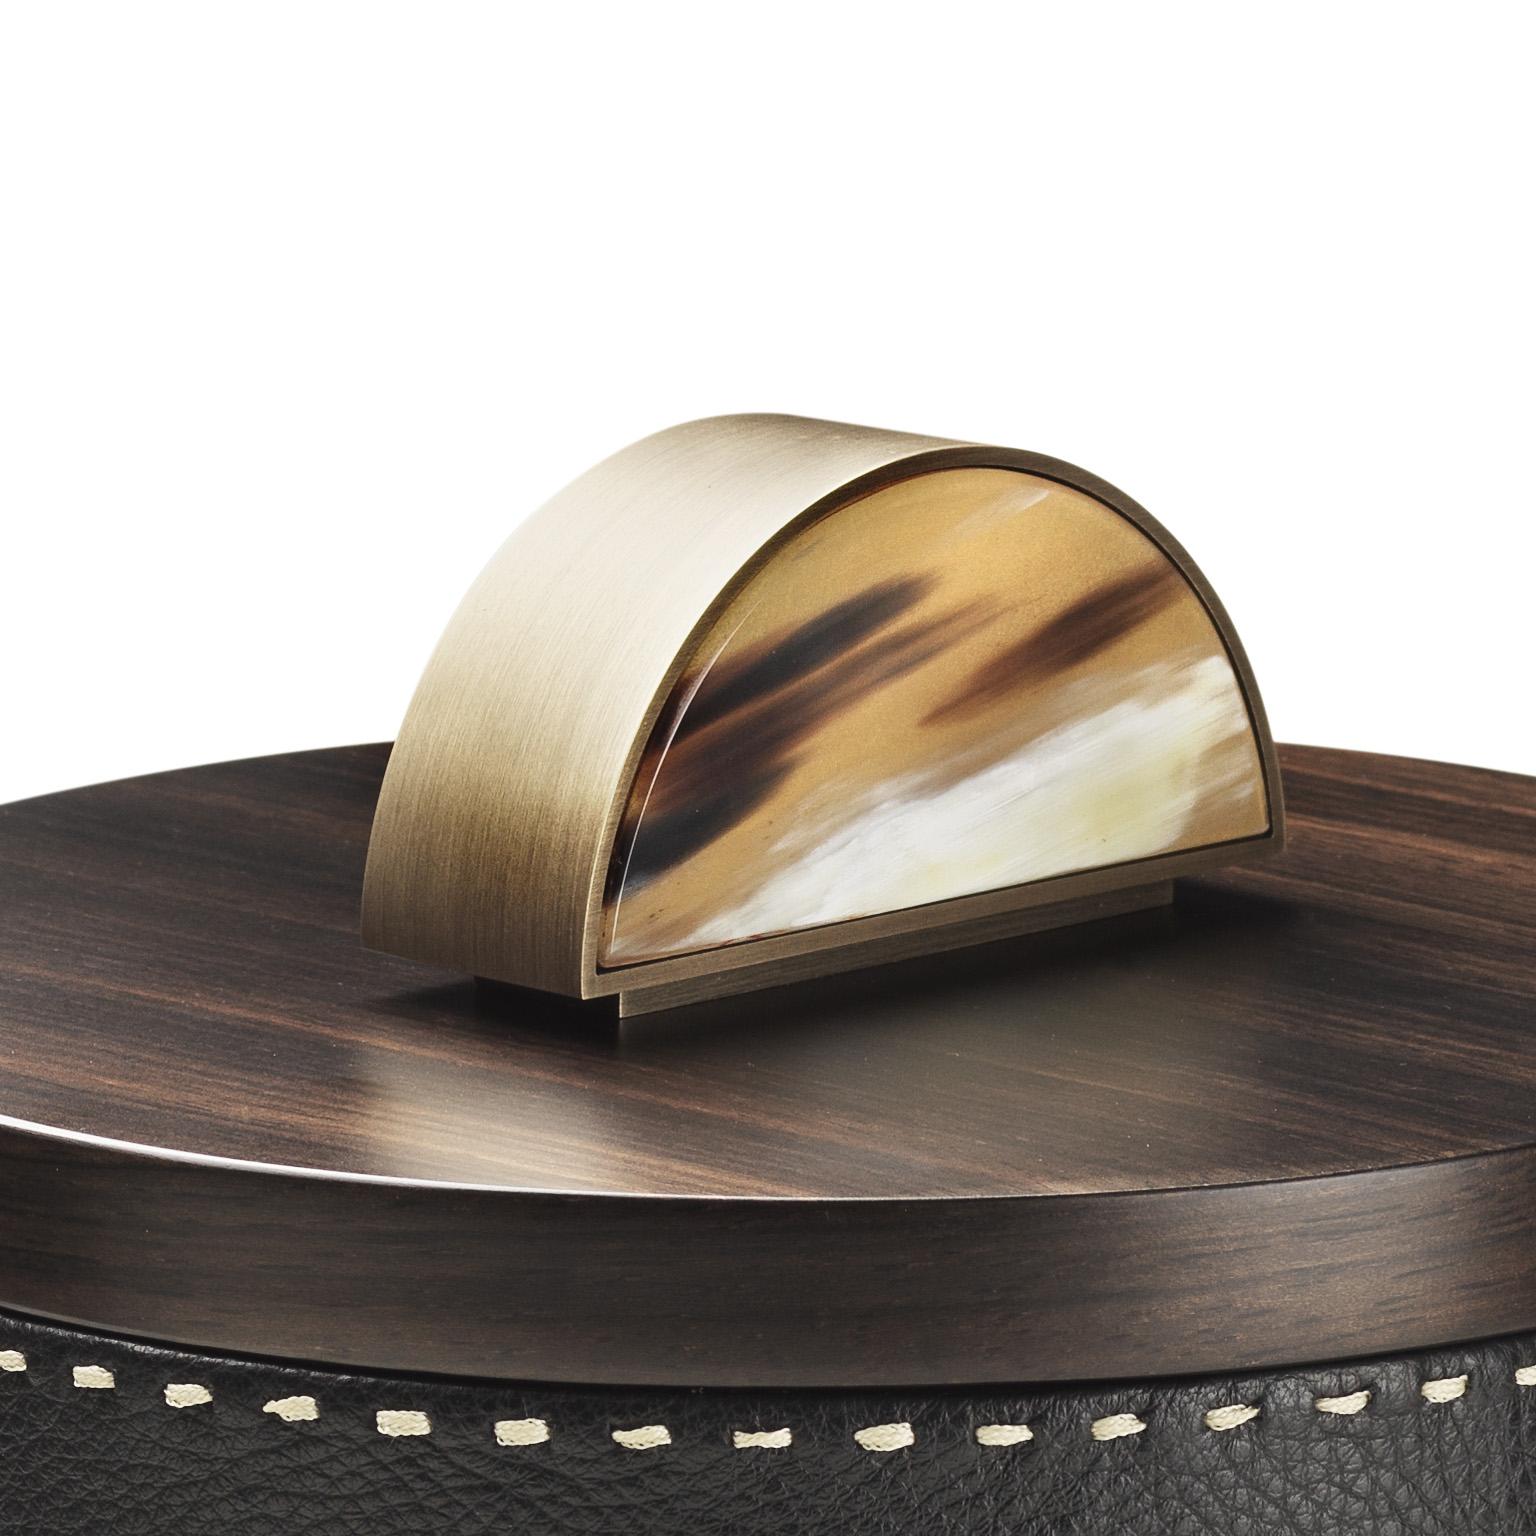 Hand-Crafted Agneta Round Box in Pebbled Leather with Handle in Corno Italiano, Mod. 4487 For Sale